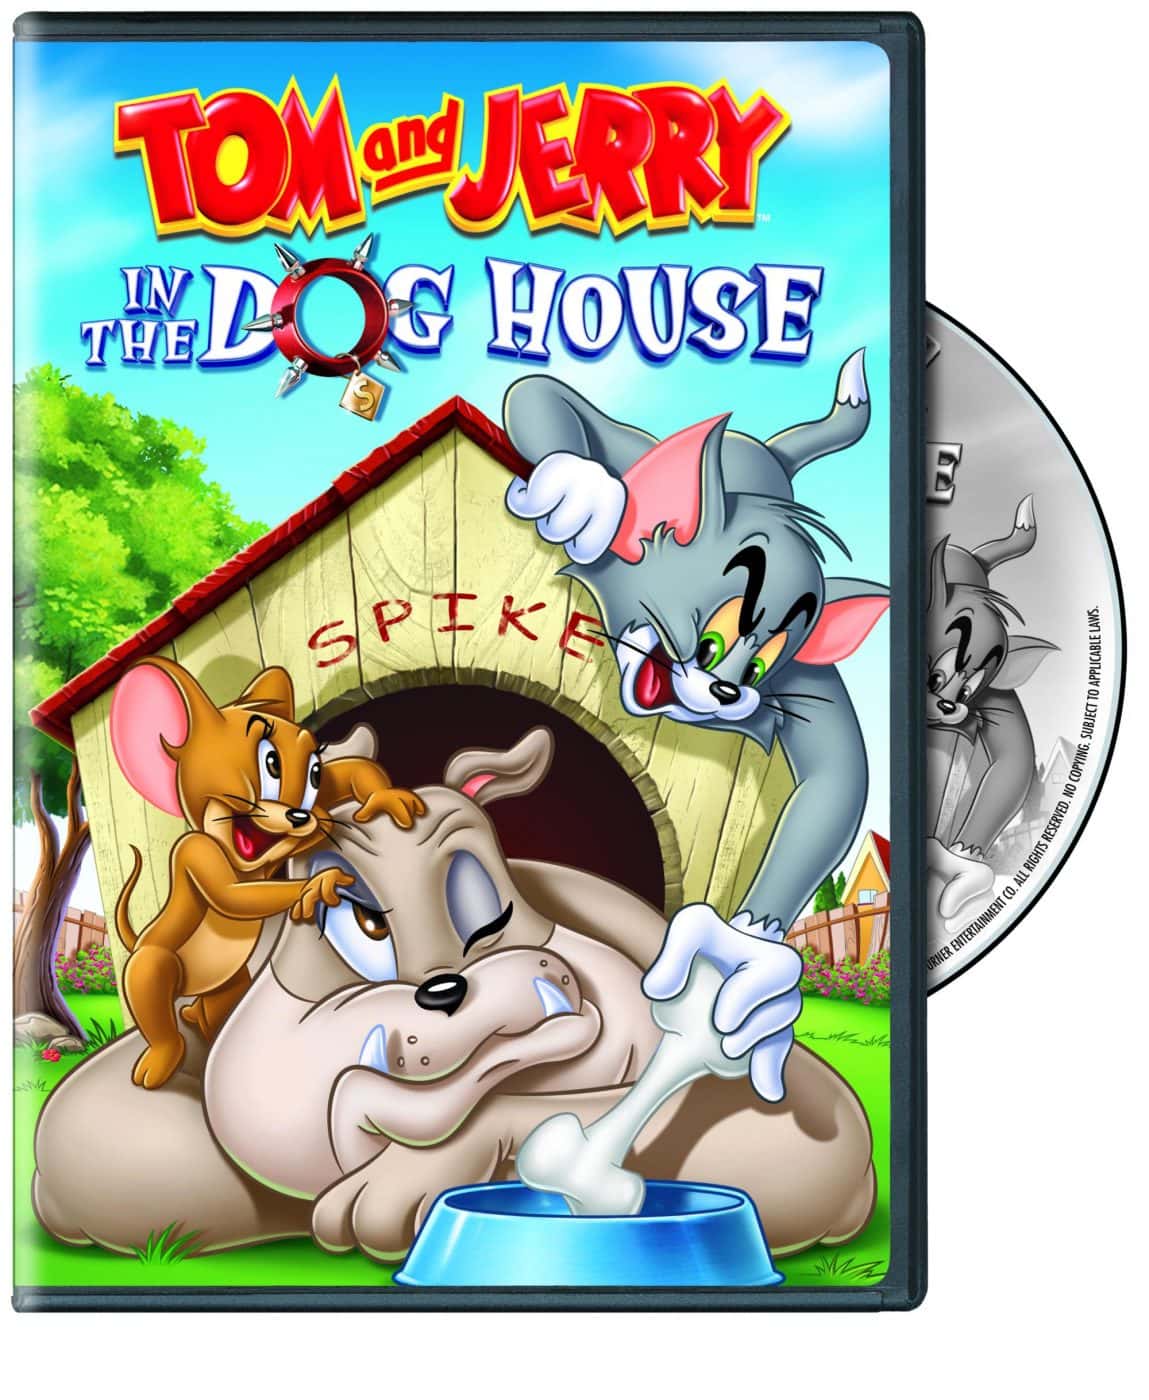 Tom & Jerry: In the Dog House DVD Review - The Review Wire